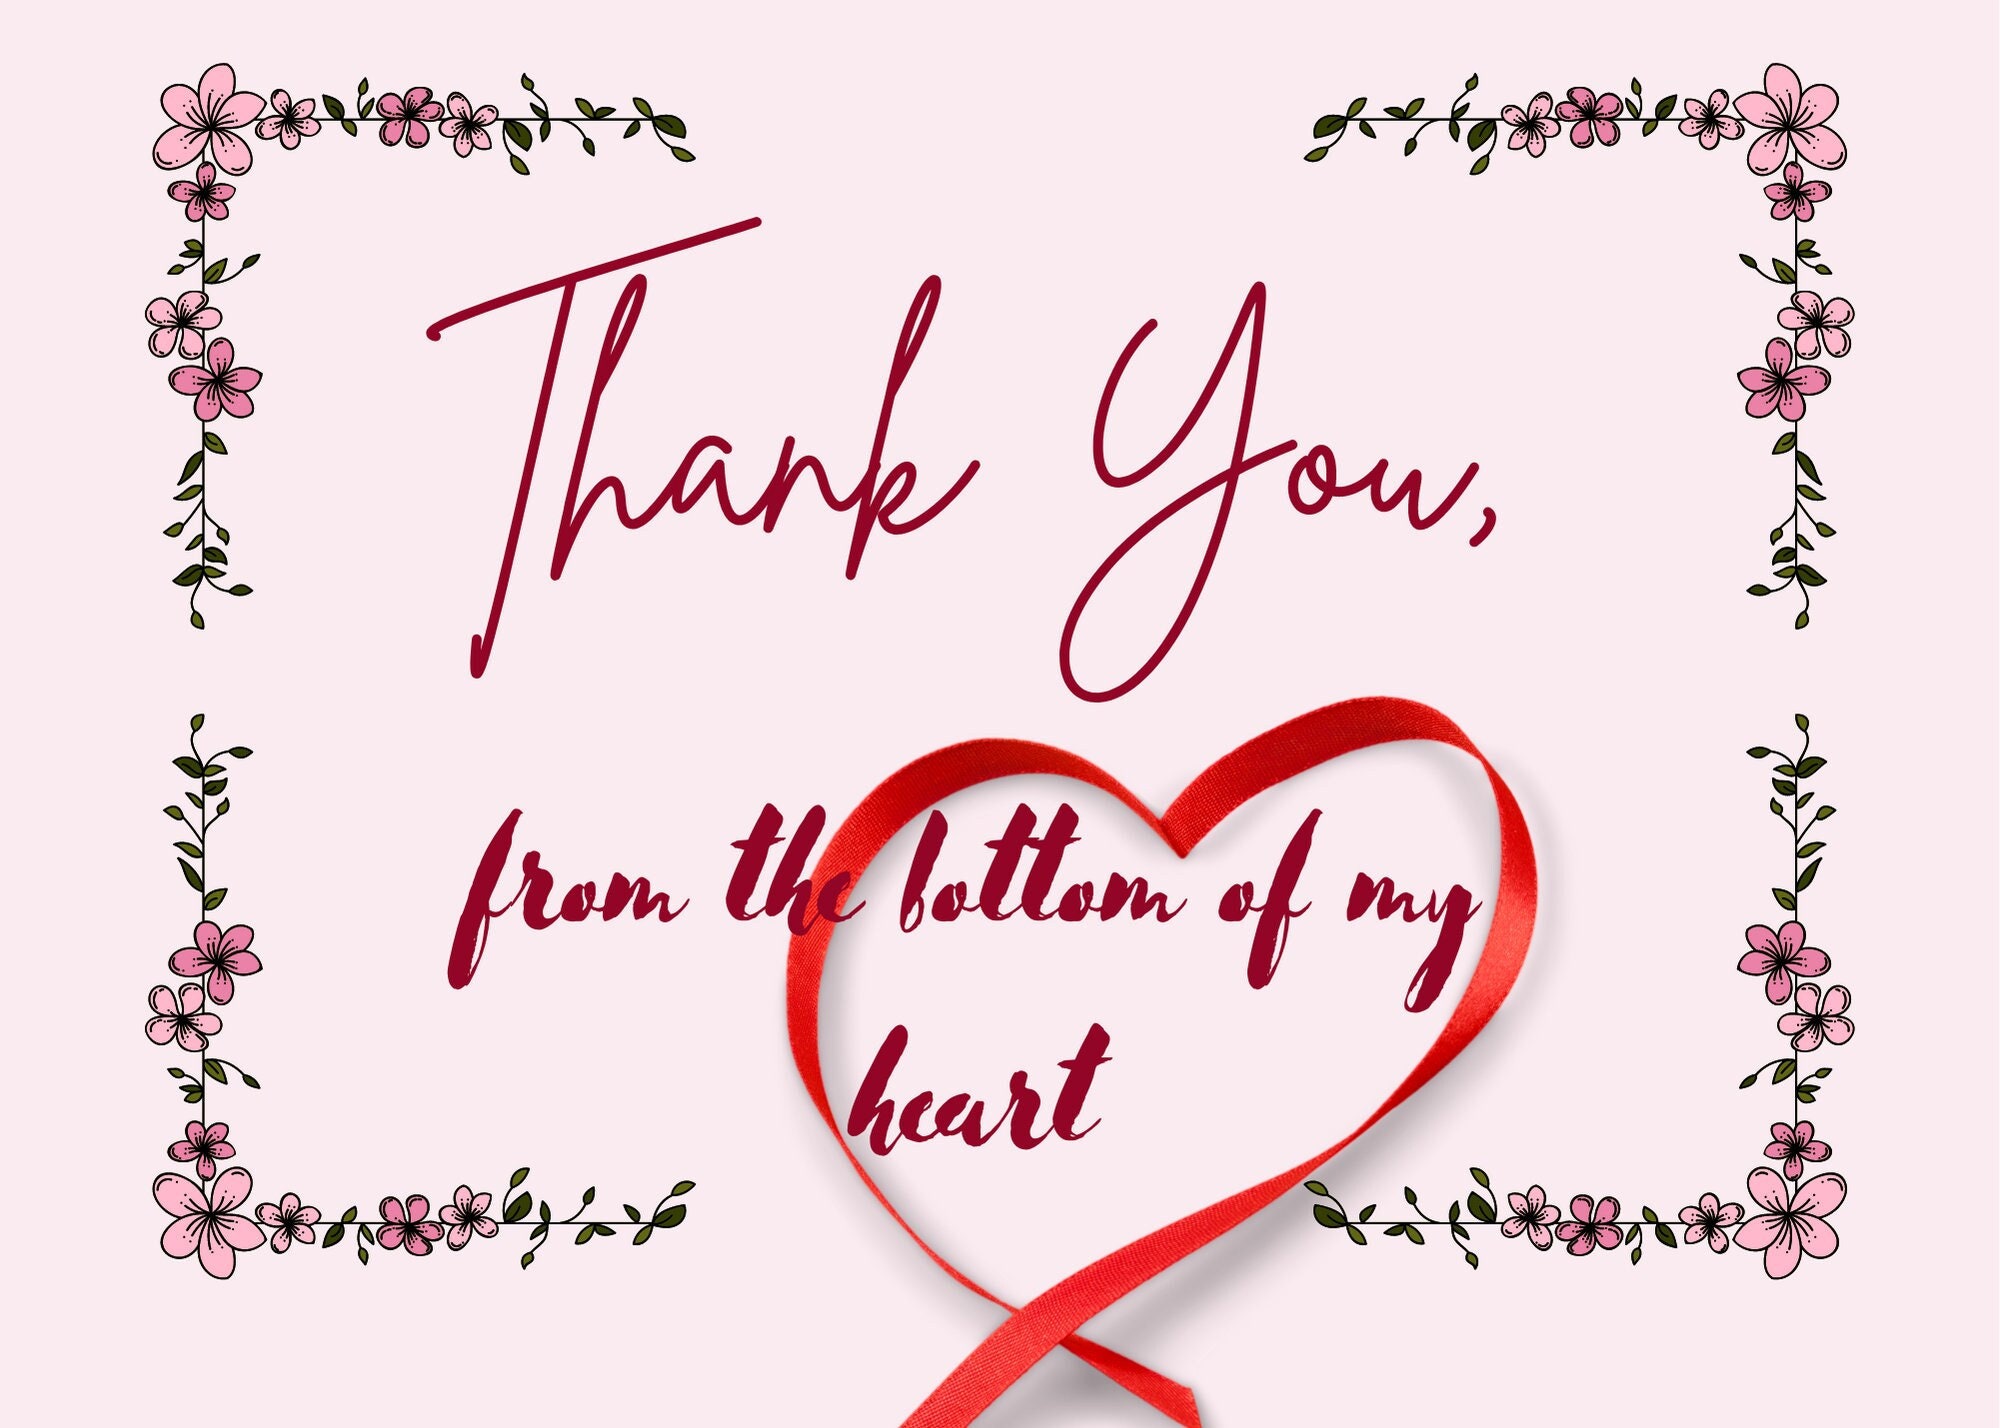 Thank You From the Bottom of My Heart Card, 5x7in (Download Now) - Etsy